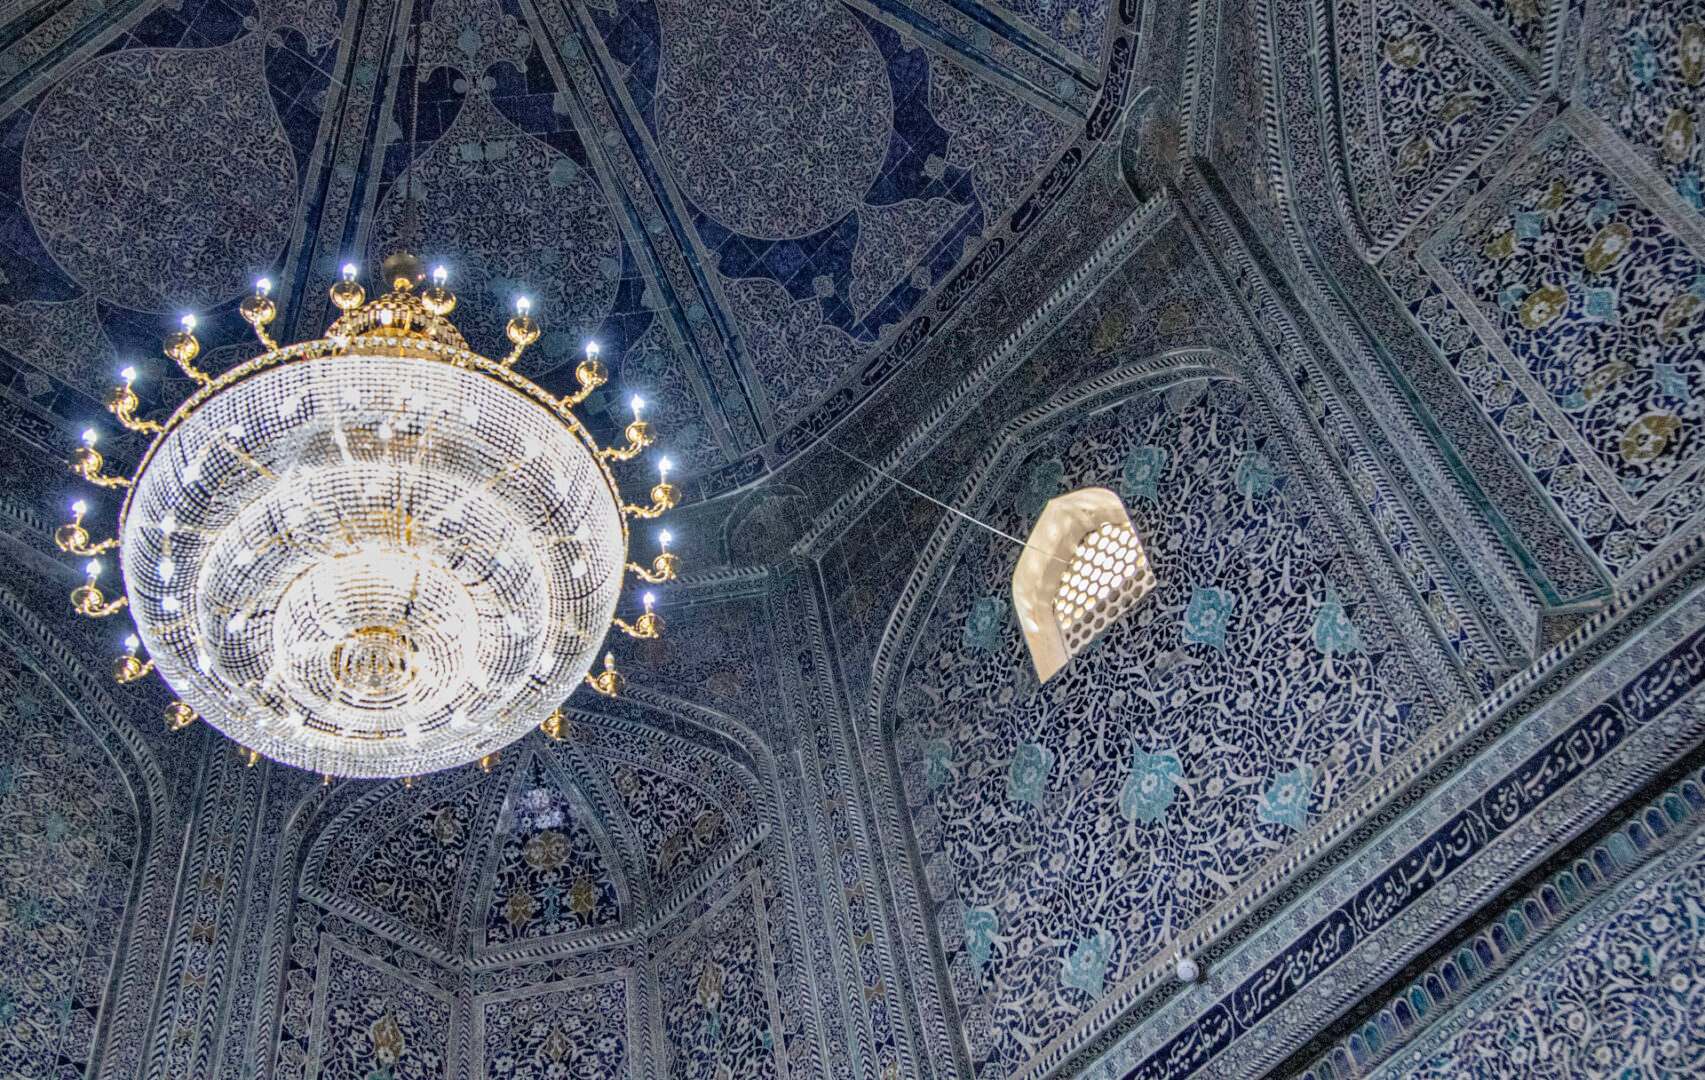 The ceiling of a blue and white building with a chandelier.